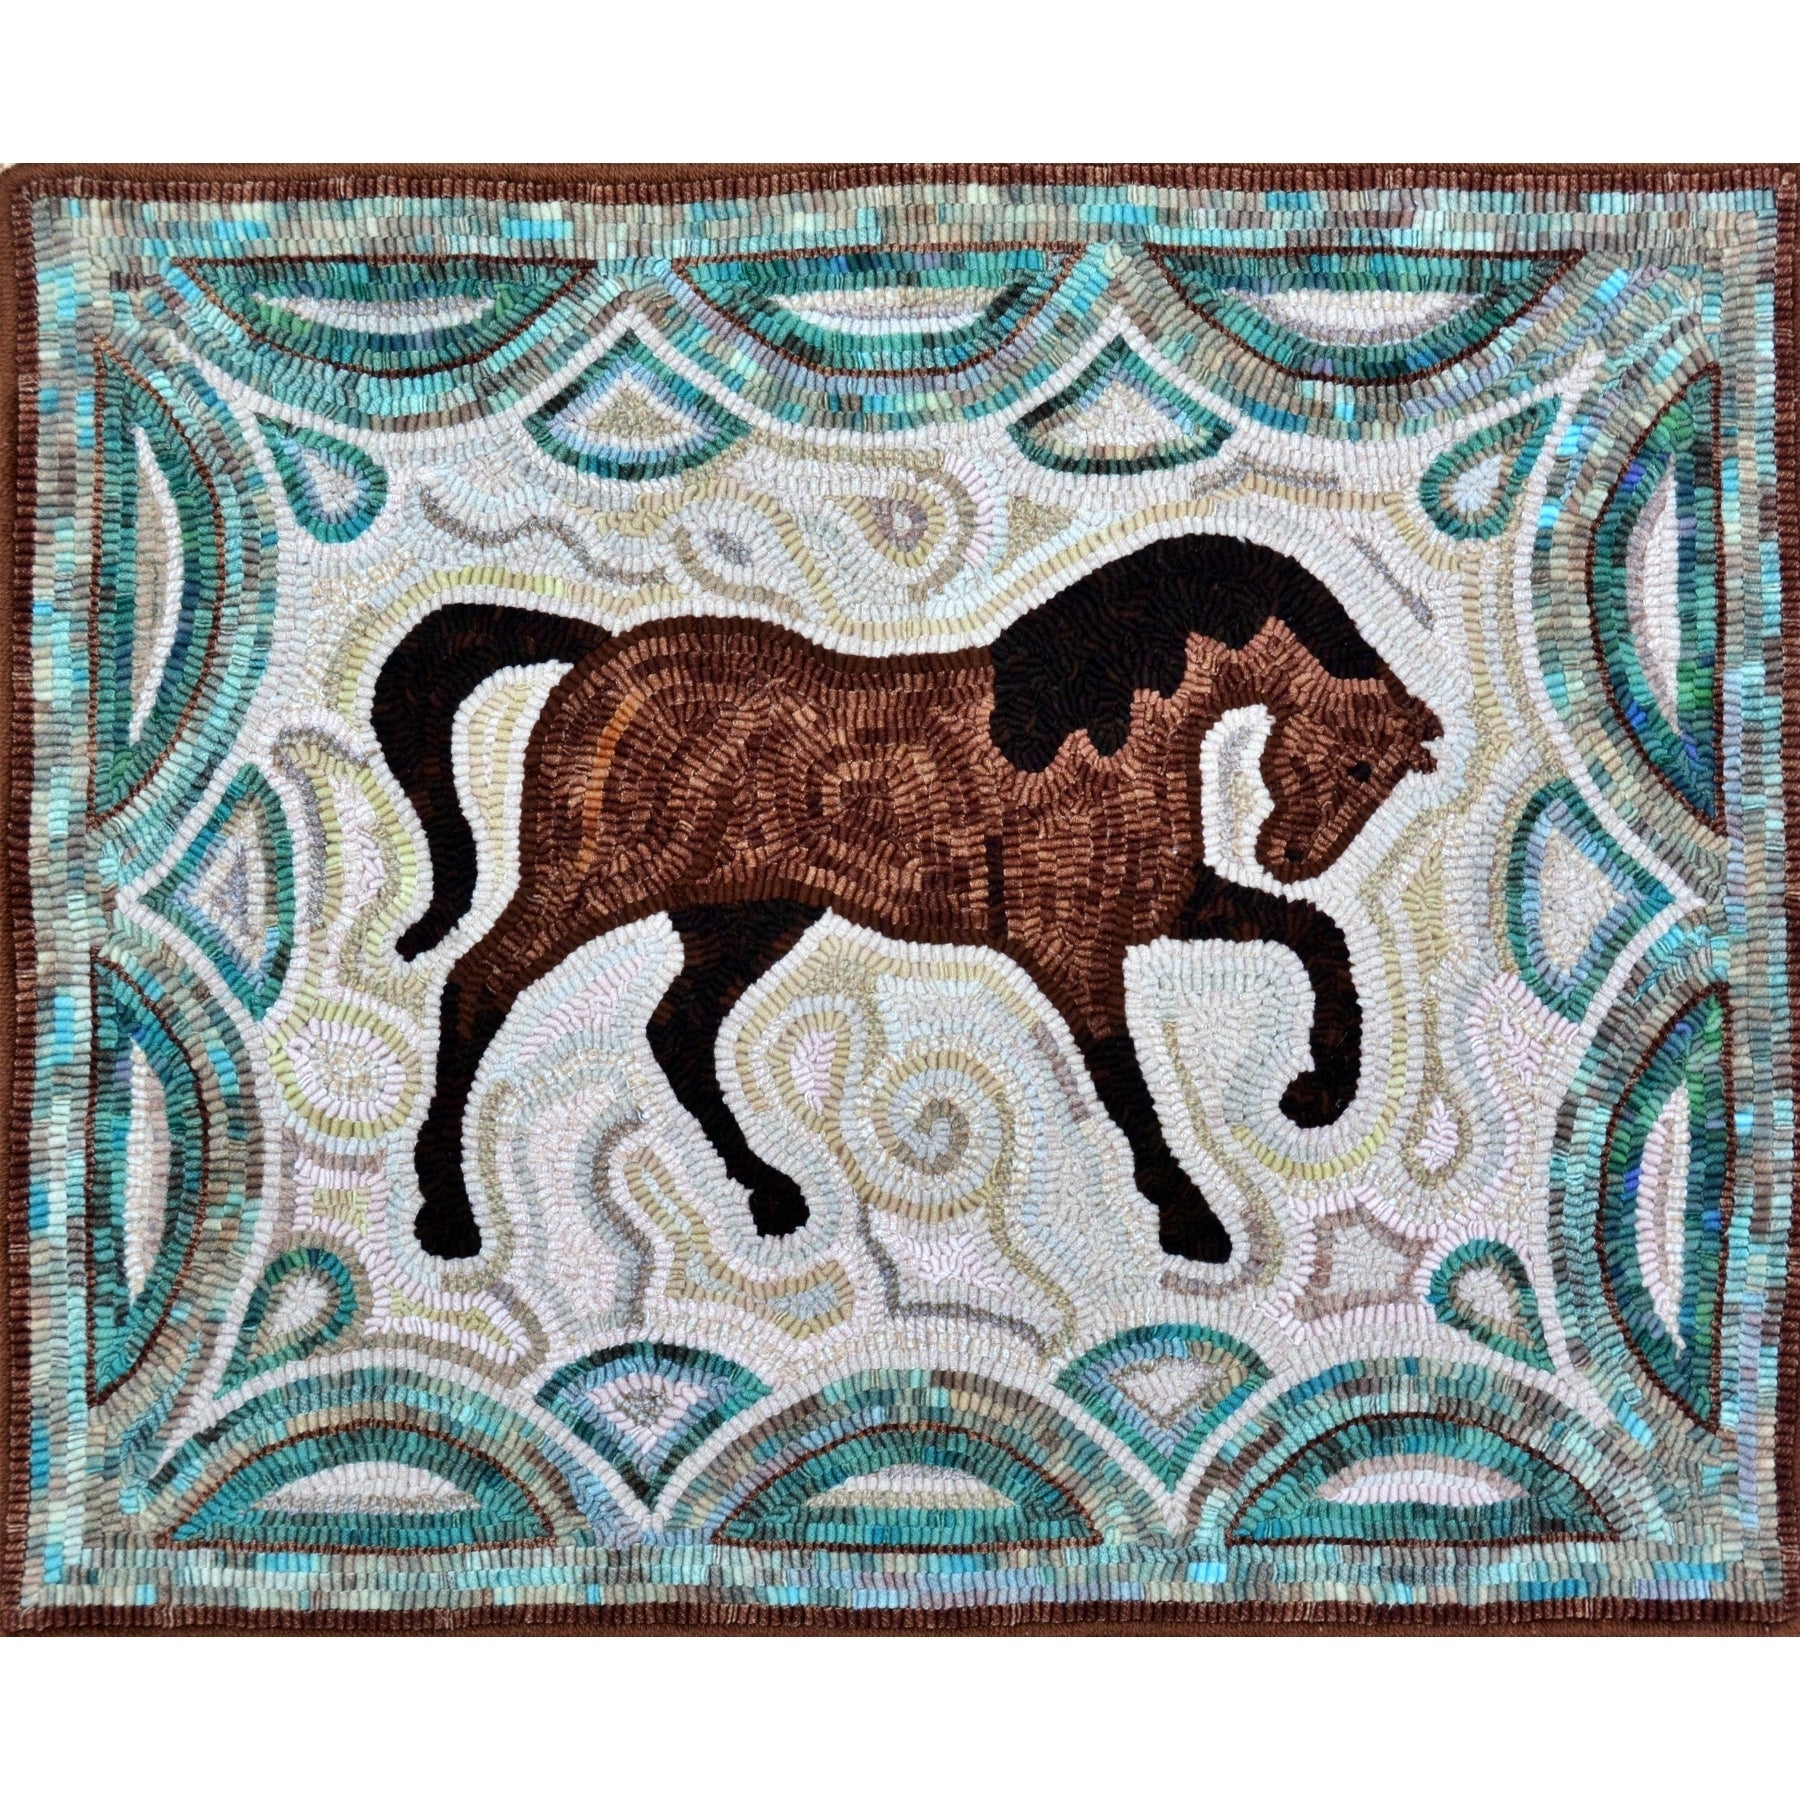 Horse, rug hooked by Alicia Kay